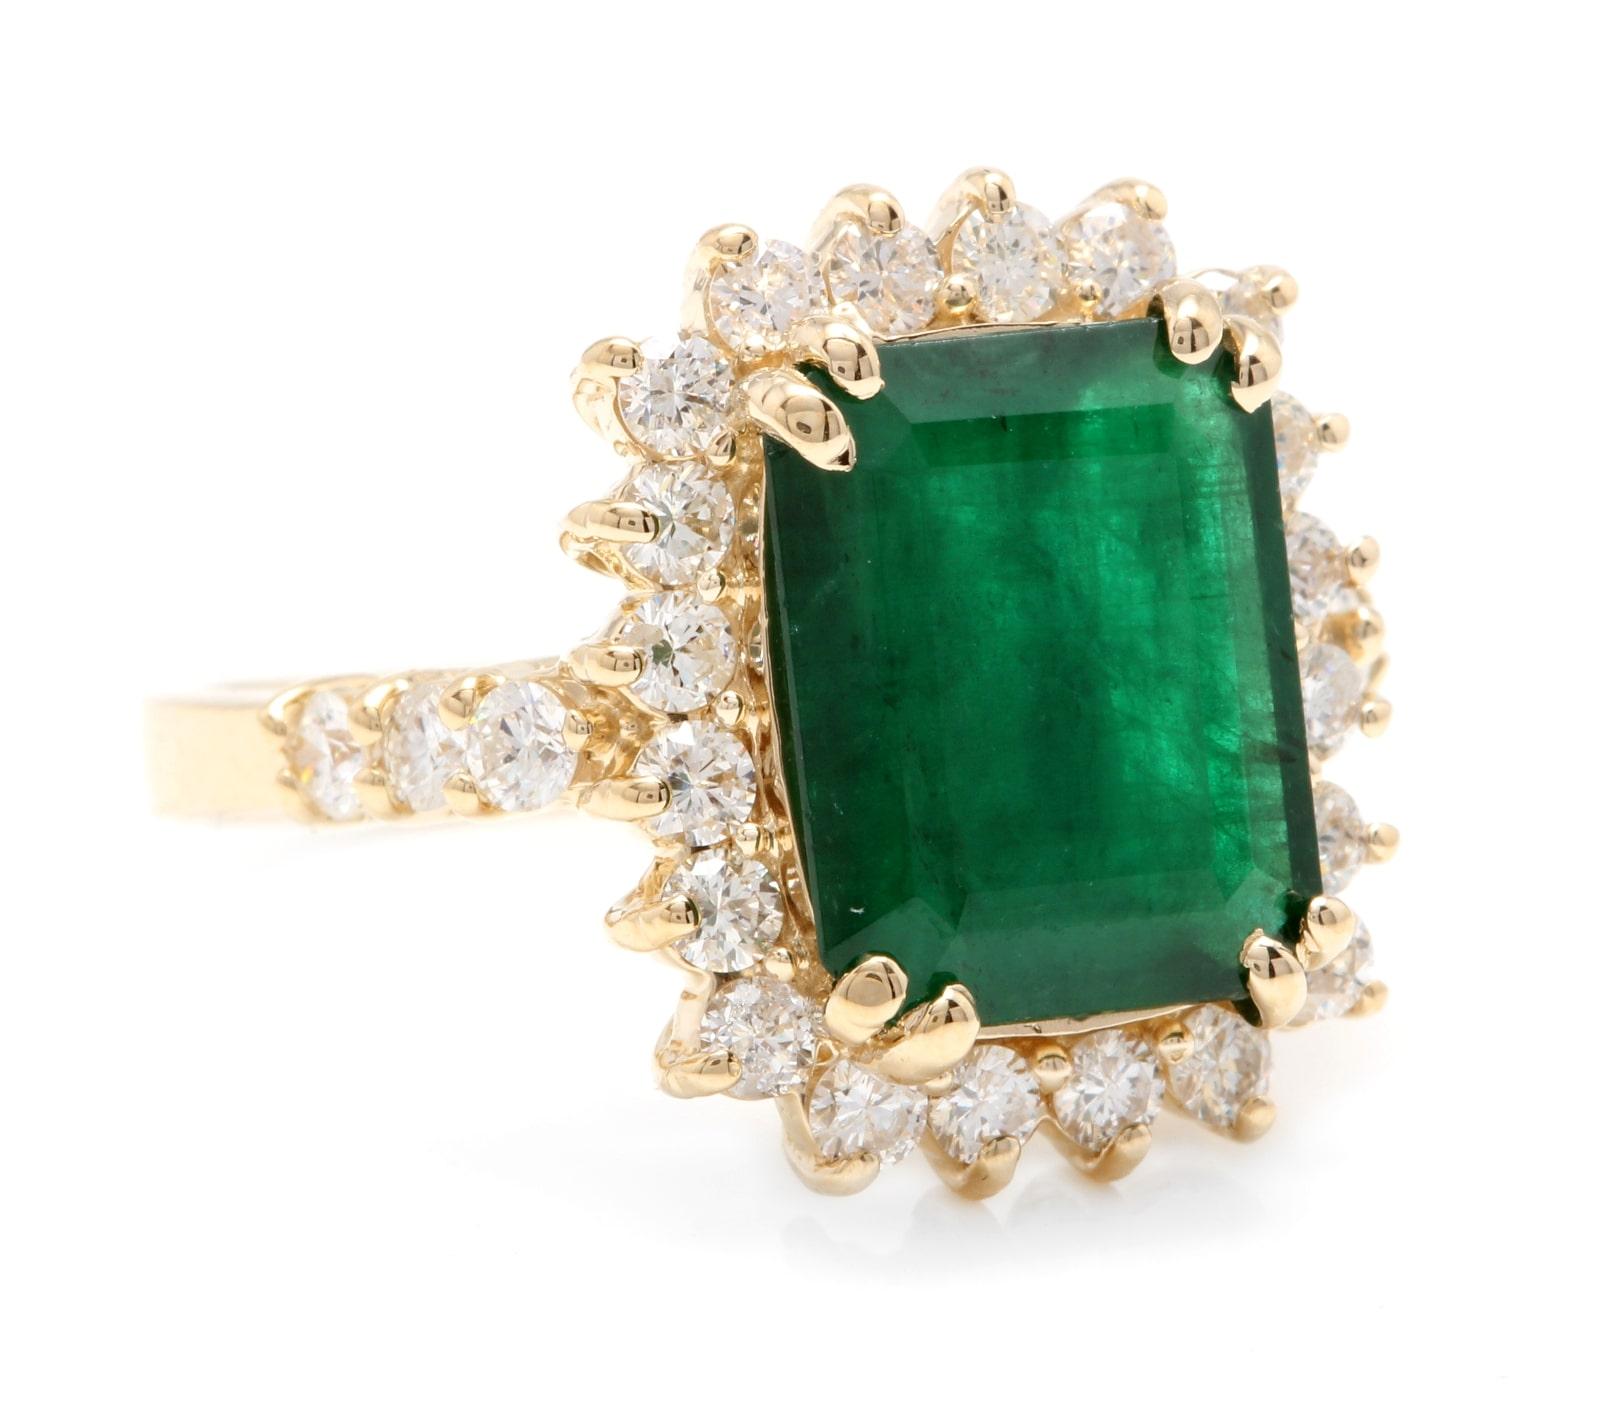 5.20 Carats Natural Emerald and Diamond 14K Solid Yellow Gold Ring

Total Natural Green Emerald Weight is: Approx. 4.20 Carats (transparent)

Emerald Measures: Approx. 11.40 x 9.20mm

Natural Round Diamonds Weight: Approx. 1.00 Carats (color G-H /